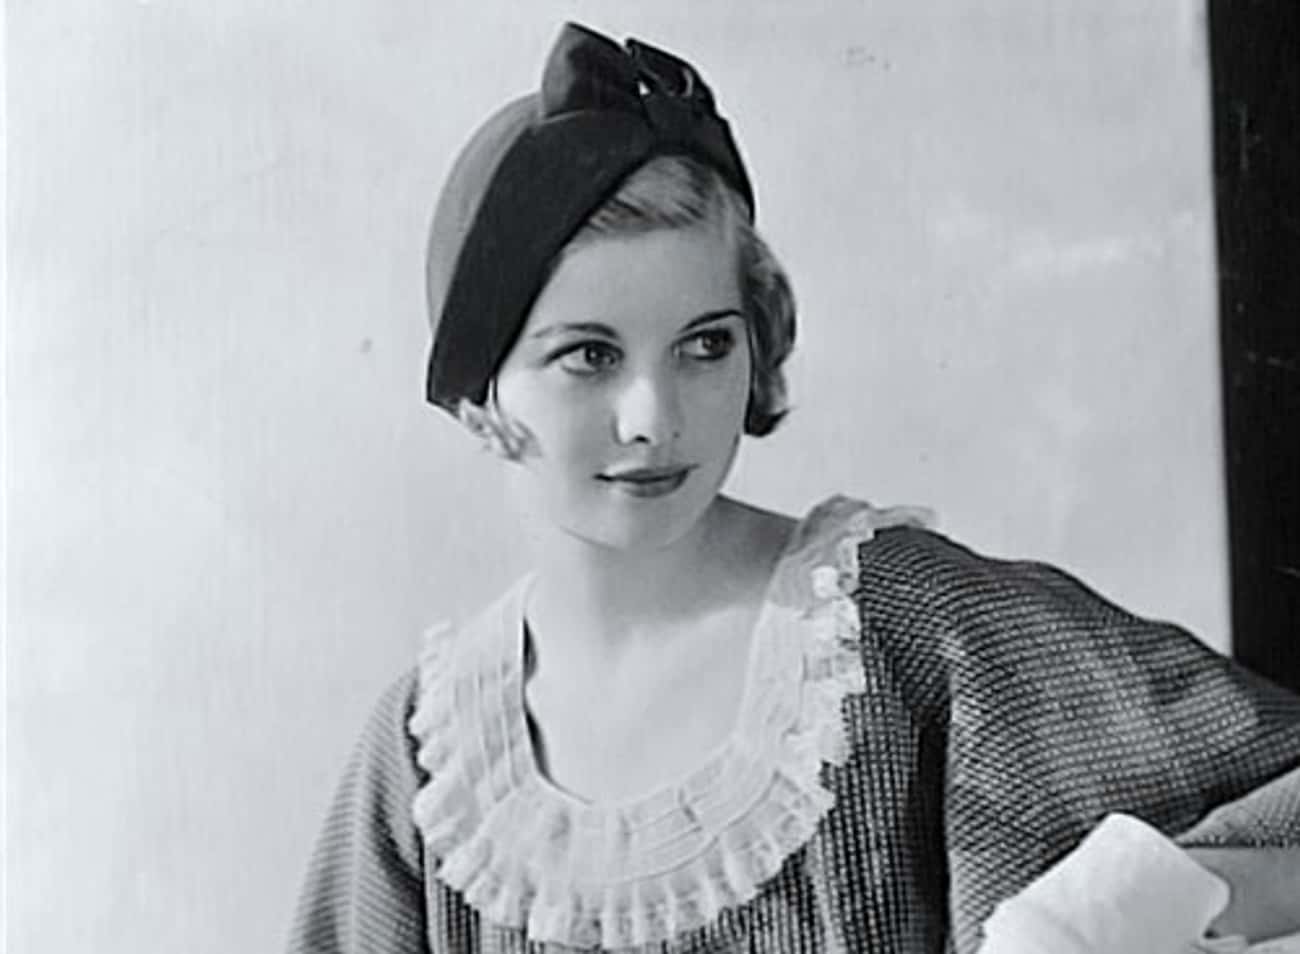 Young Lucille Ball in Checkered Dress with White Collar and Black Hat